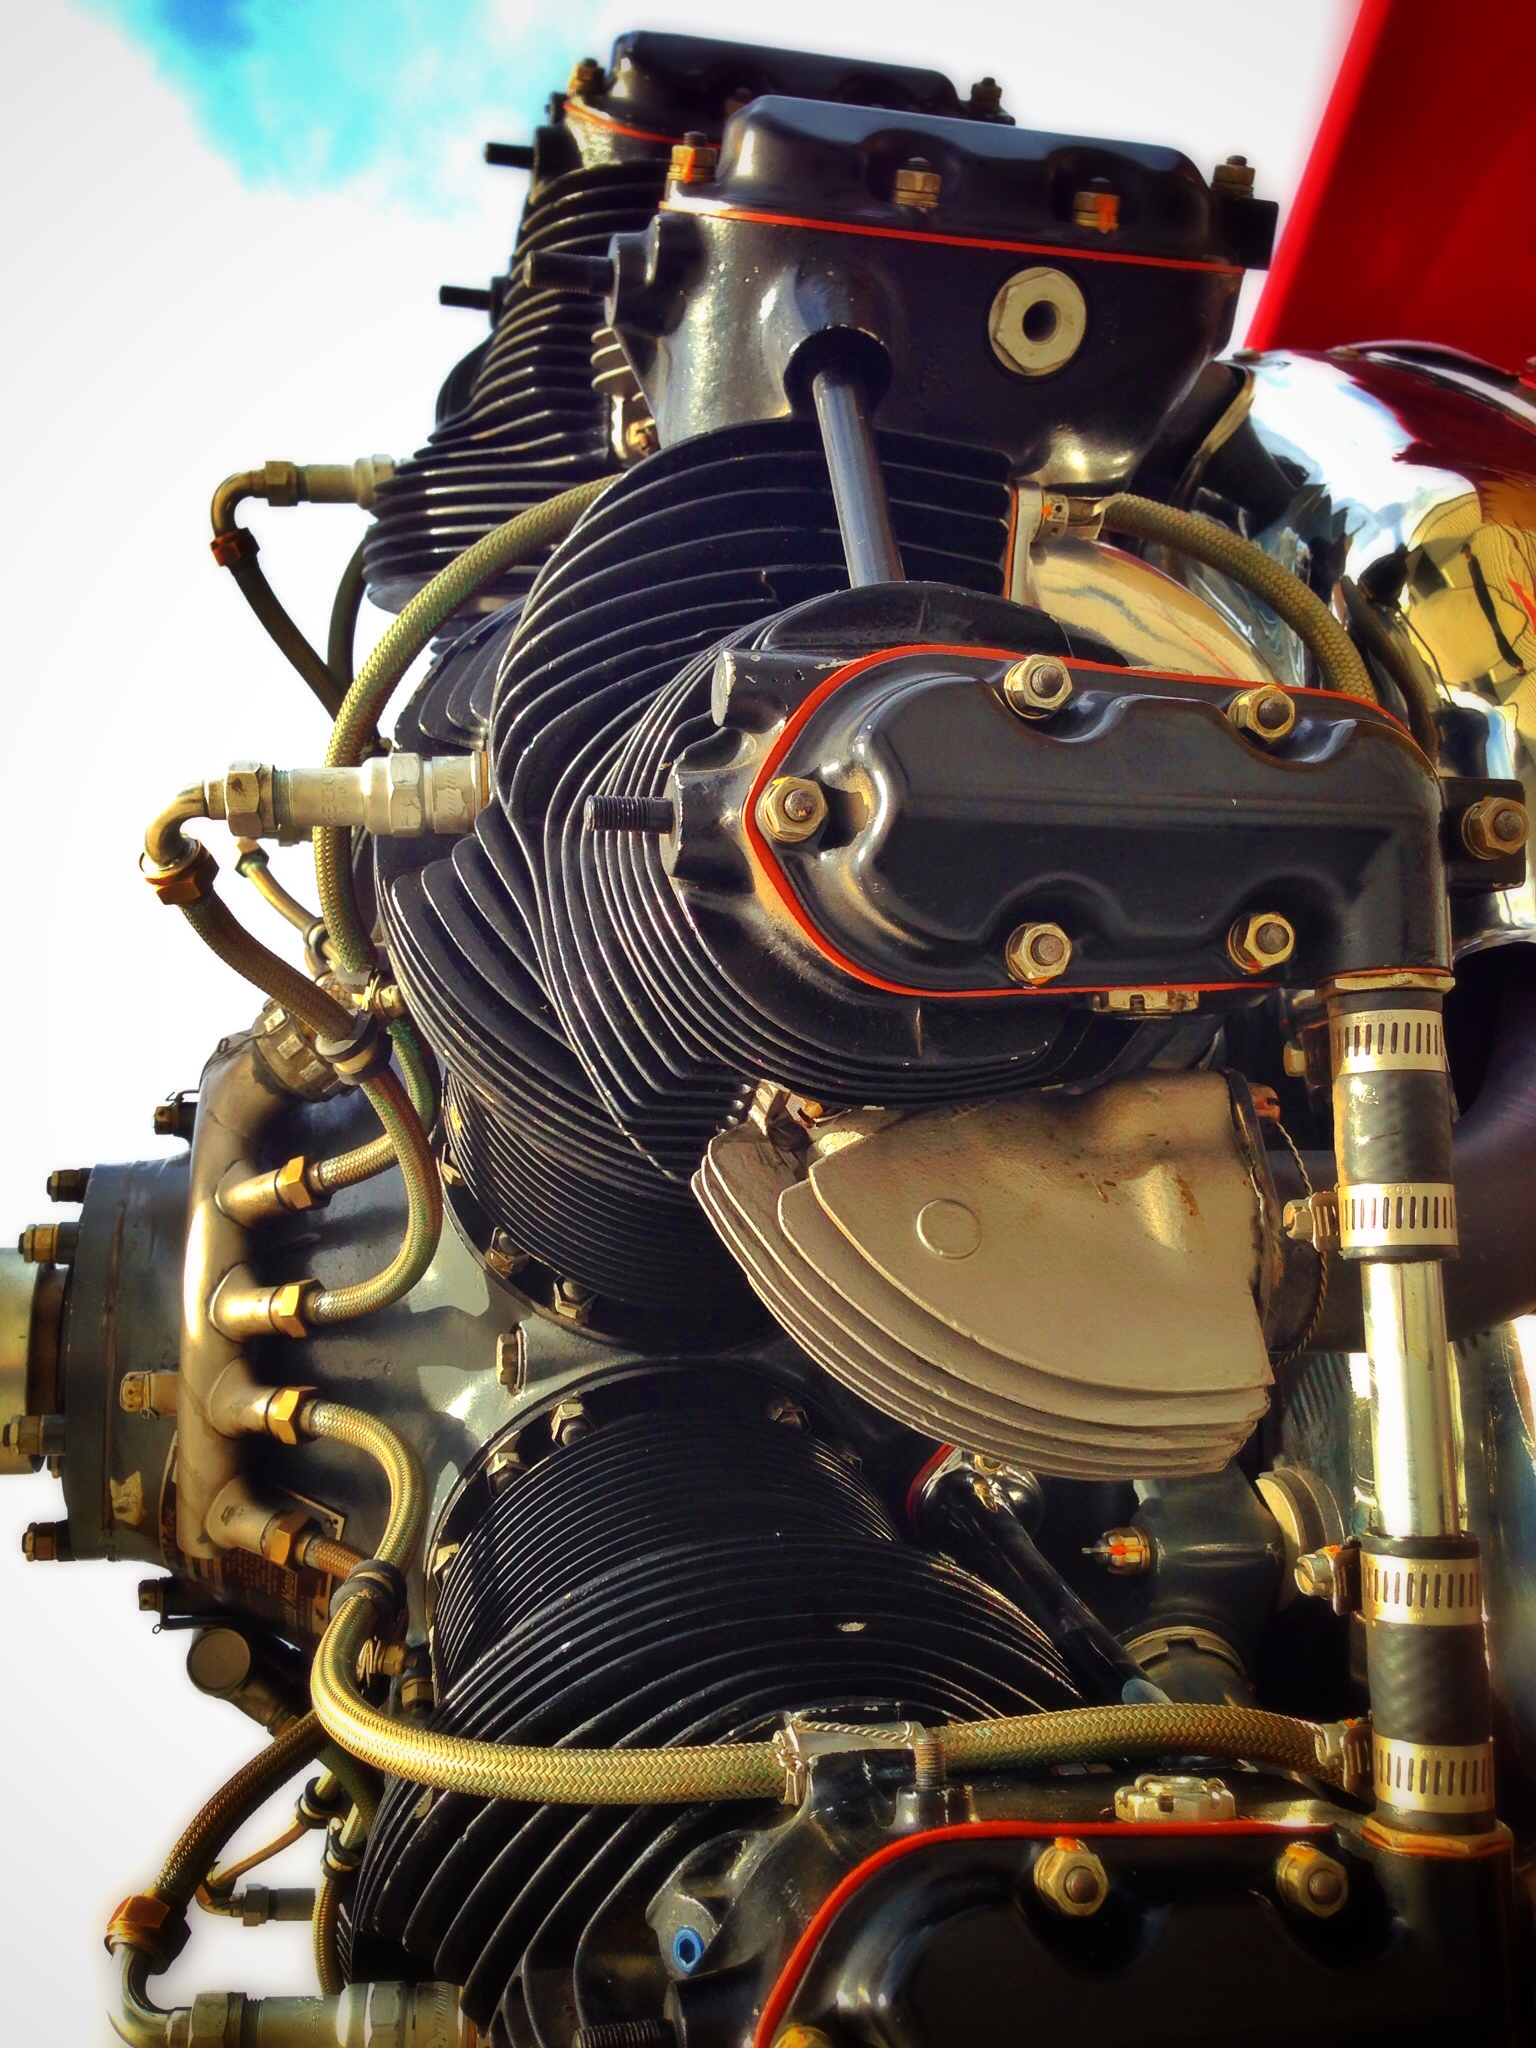 This Continental W-670 radial engine is not original.  Most commonly found on the Boeing Stearman, it replaced the factory-standard Wright “Whirlwind” J-6 five-cylinder powerplant.